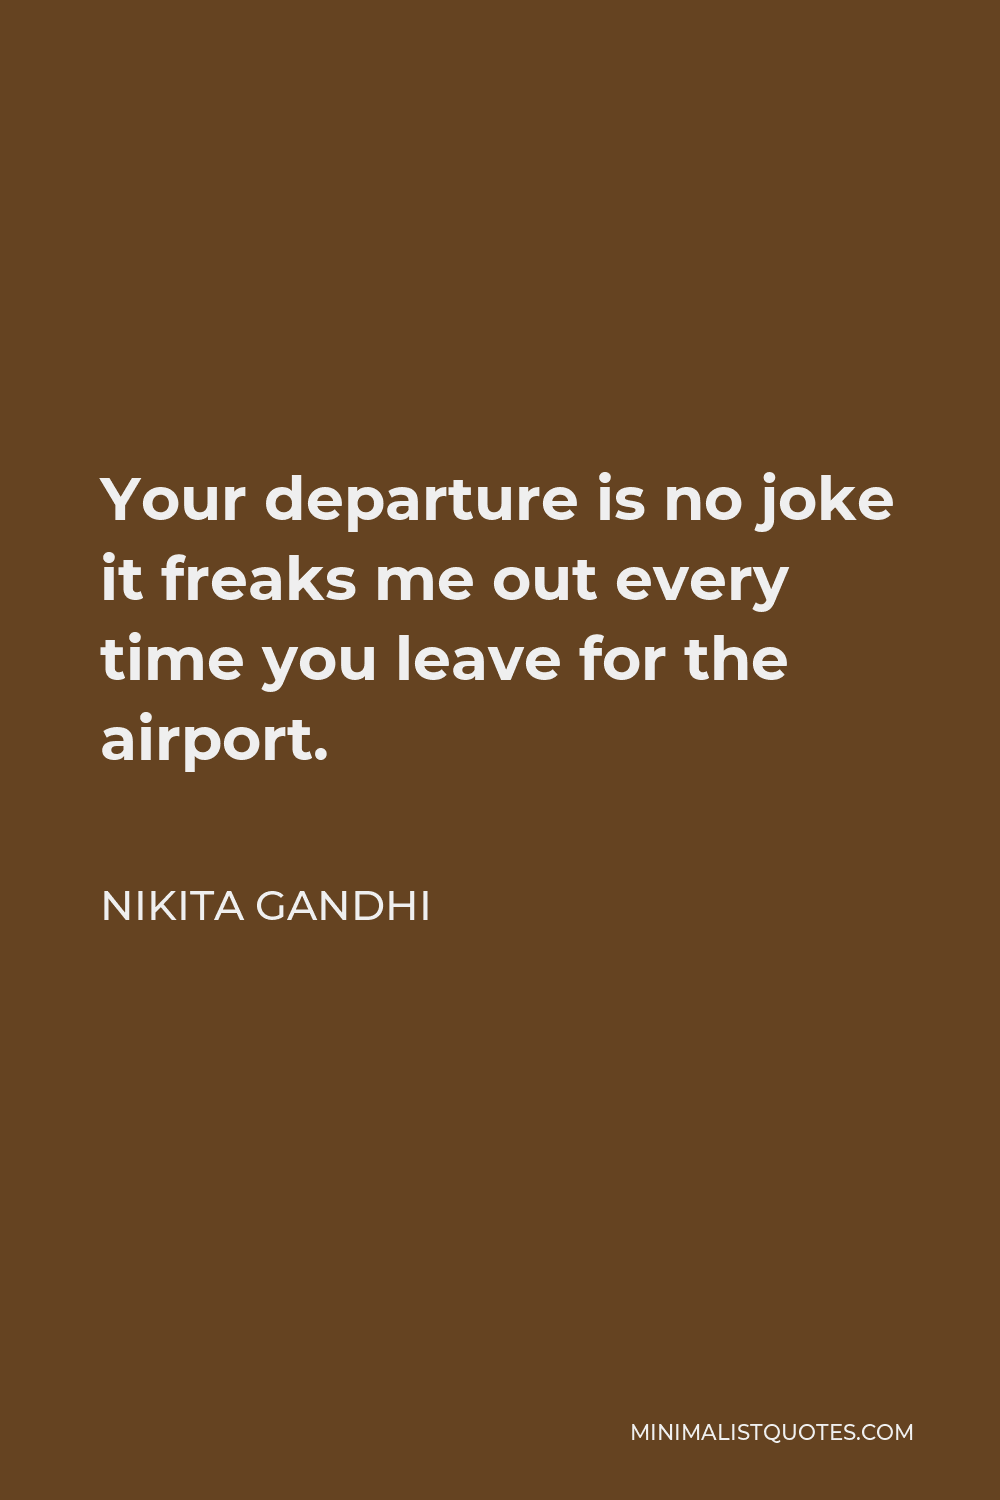 Nikita Gandhi Quote - Your departure is no joke it freaks me out every time you leave for the airport.